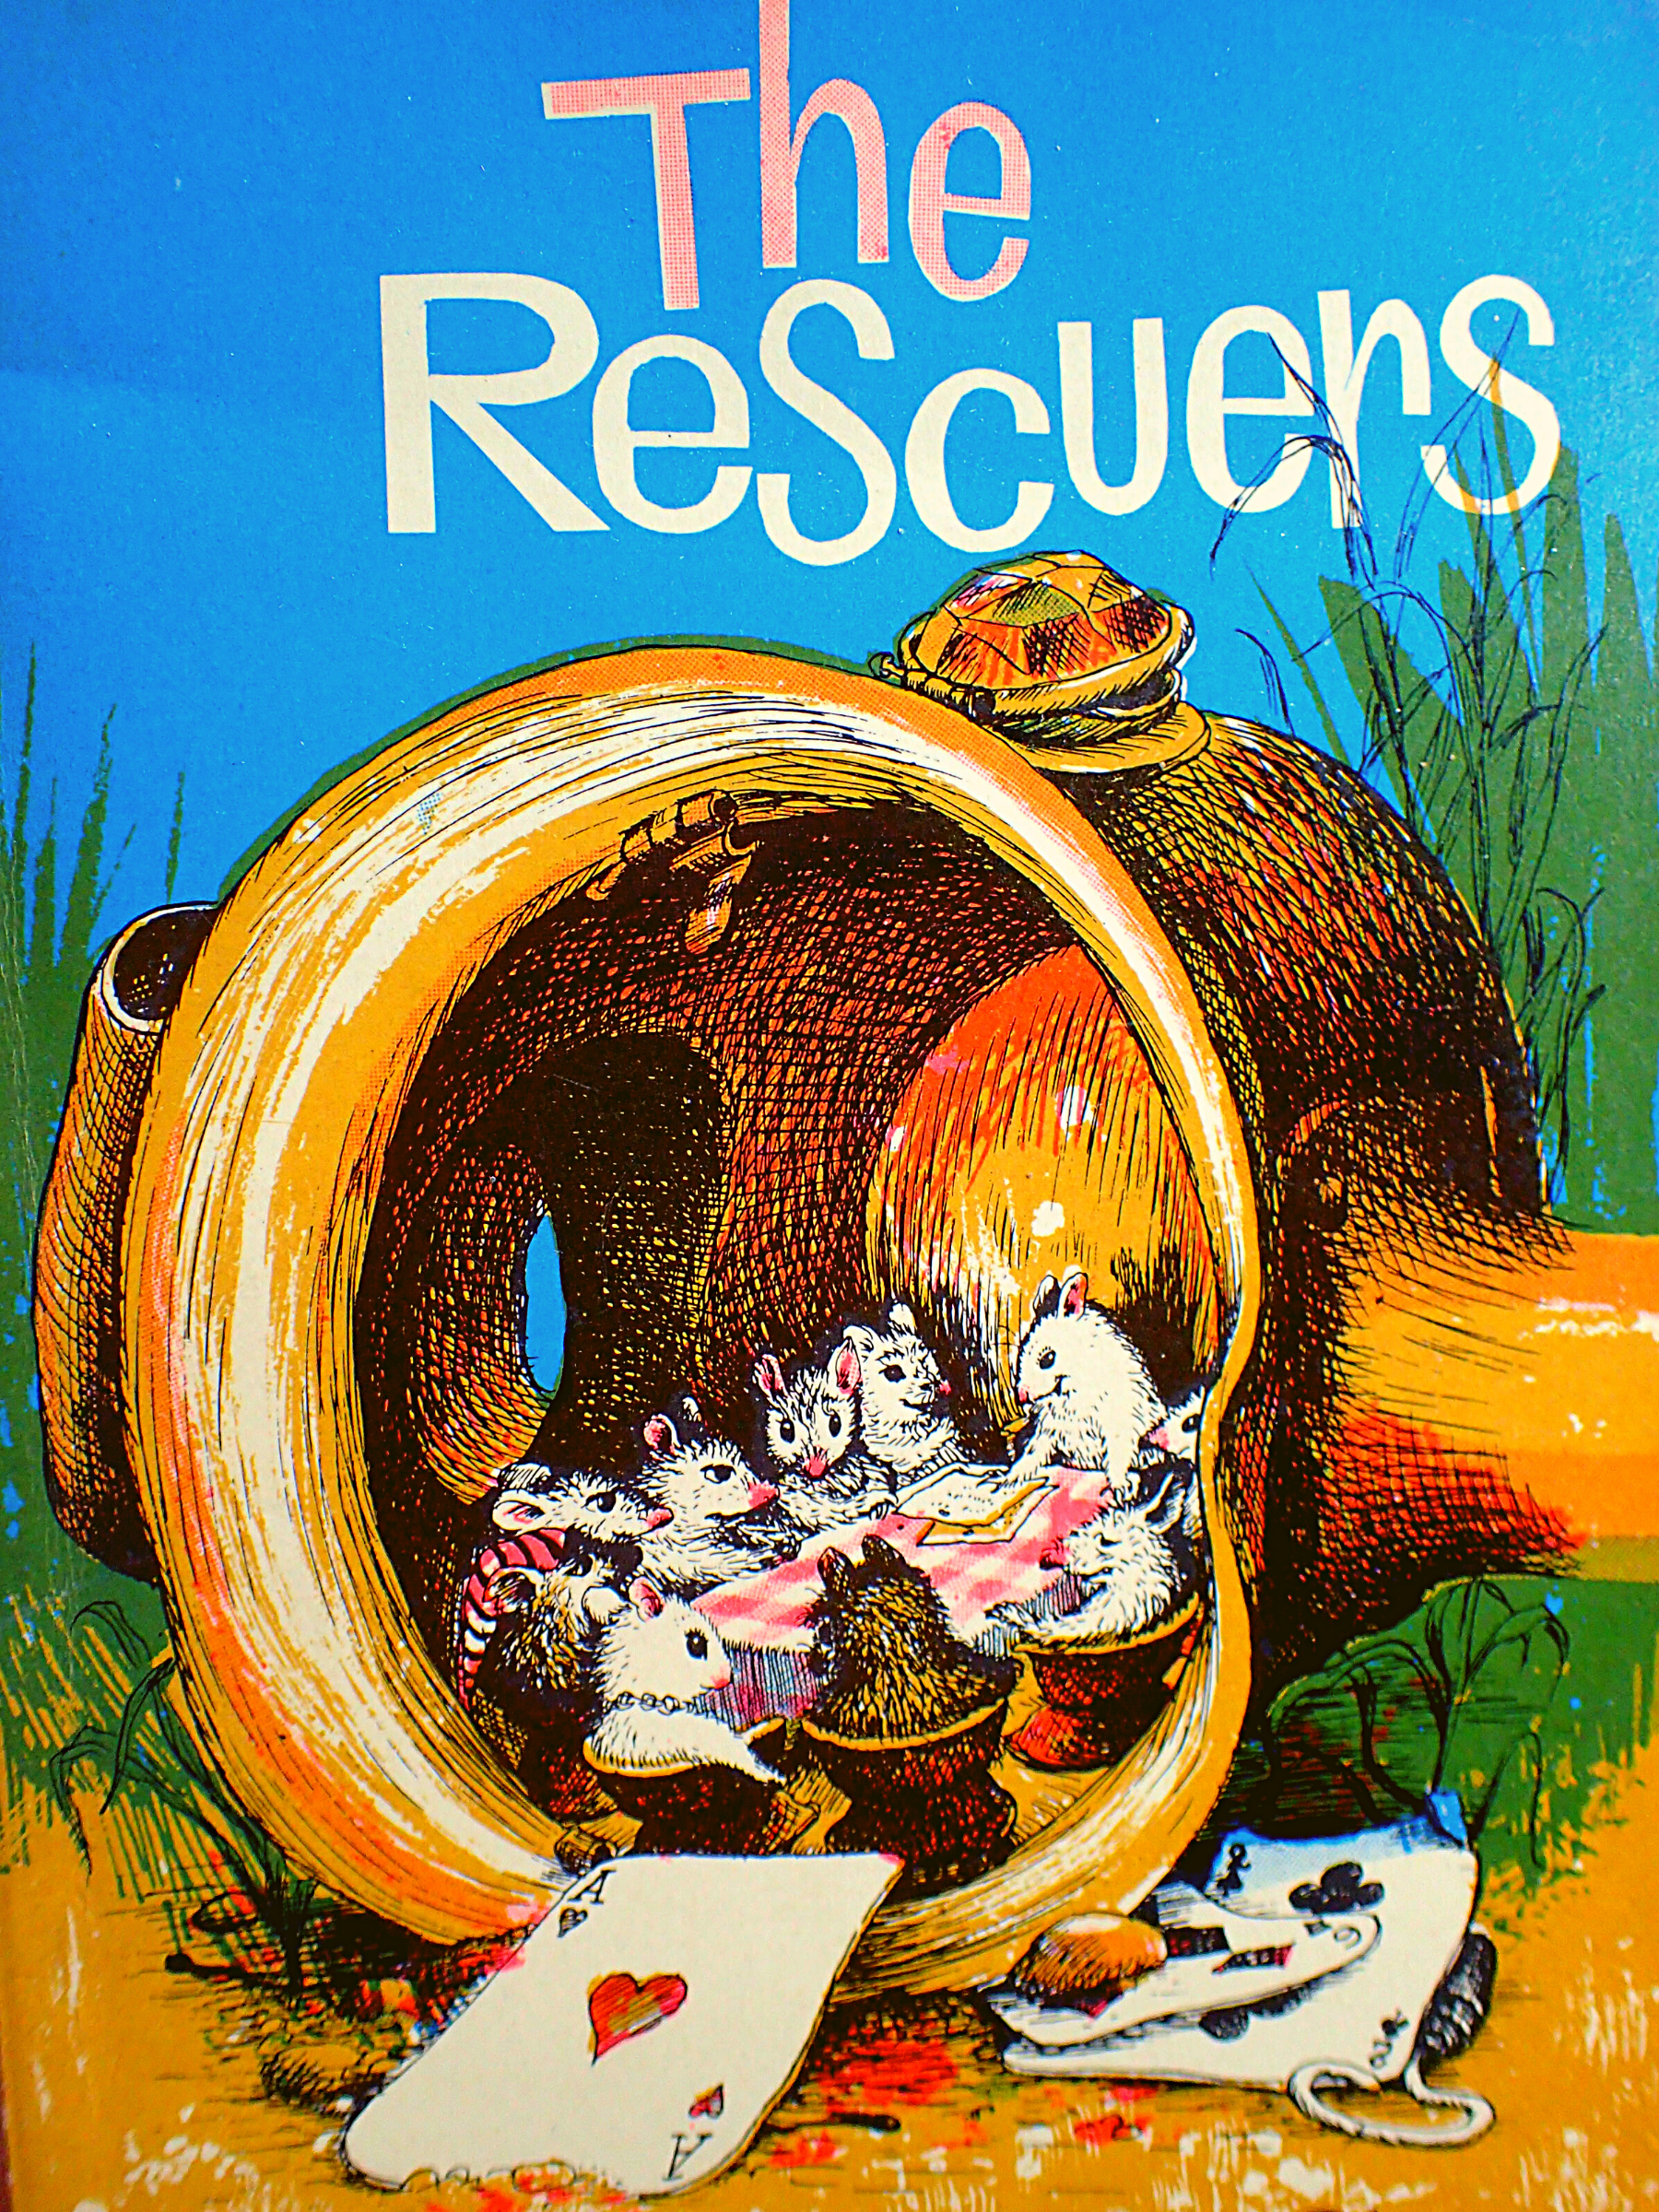 The rescuers cute mice reusing repaired items 